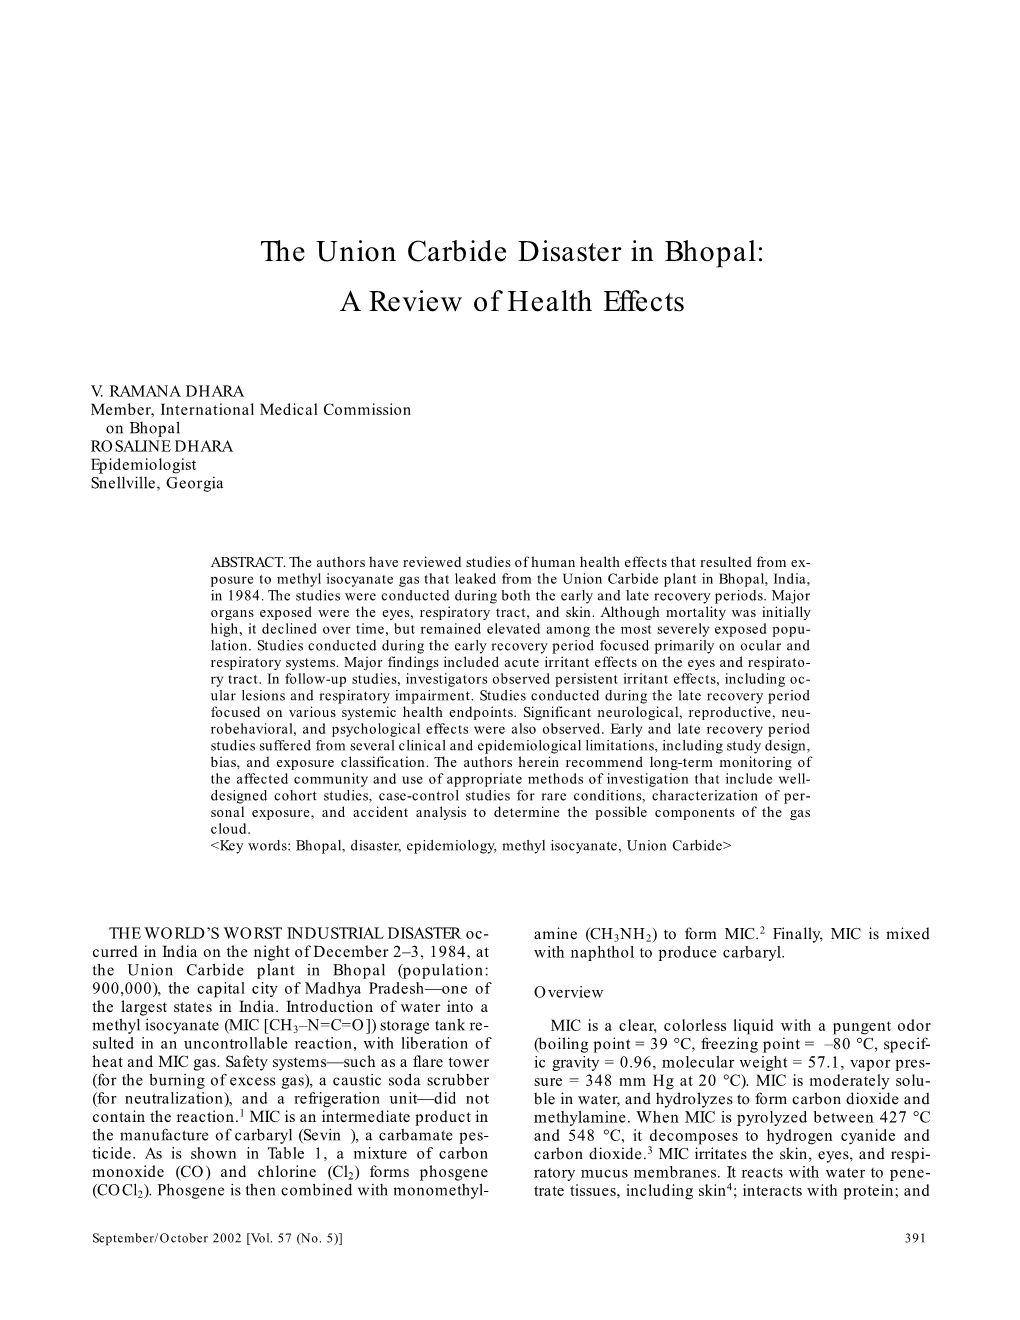 The Union Carbide Disaster in Bhopal: a Review of Health Effects